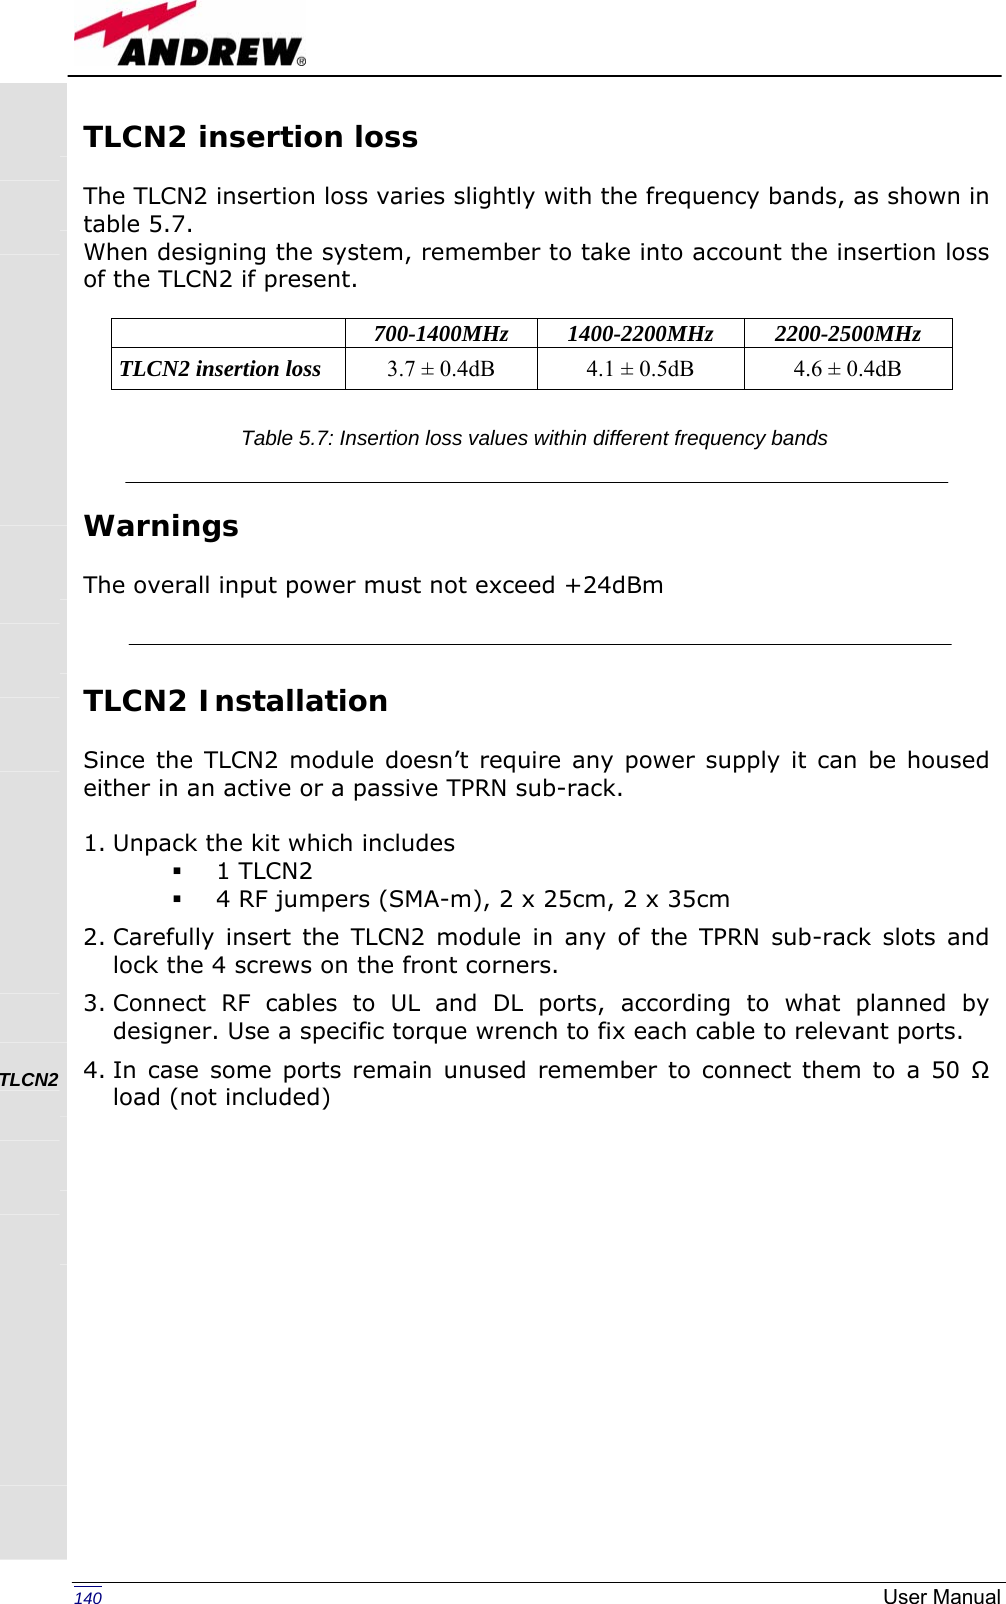   140  User ManualTLCN2 insertion loss   The TLCN2 insertion loss varies slightly with the frequency bands, as shown in table 5.7. When designing the system, remember to take into account the insertion loss of the TLCN2 if present.     Warnings  The overall input power must not exceed +24dBm      TLCN2 Installation  Since the TLCN2 module doesn’t require any power supply it can be housed either in an active or a passive TPRN sub-rack.  1. Unpack the kit which includes  1 TLCN2  4 RF jumpers (SMA-m), 2 x 25cm, 2 x 35cm 2. Carefully insert the TLCN2 module in any of the TPRN sub-rack slots and lock the 4 screws on the front corners. 3. Connect RF cables to UL and DL ports, according to what planned by designer. Use a specific torque wrench to fix each cable to relevant ports. 4. In case some ports remain unused remember to connect them to a 50 Ω load (not included)  700-1400MHz 1400-2200MHz 2200-2500MHz TLCN2 insertion loss  3.7 ± 0.4dB  4.1 ± 0.5dB  4.6 ± 0.4dB              TLCN2       Table 5.7: Insertion loss values within different frequency bands 